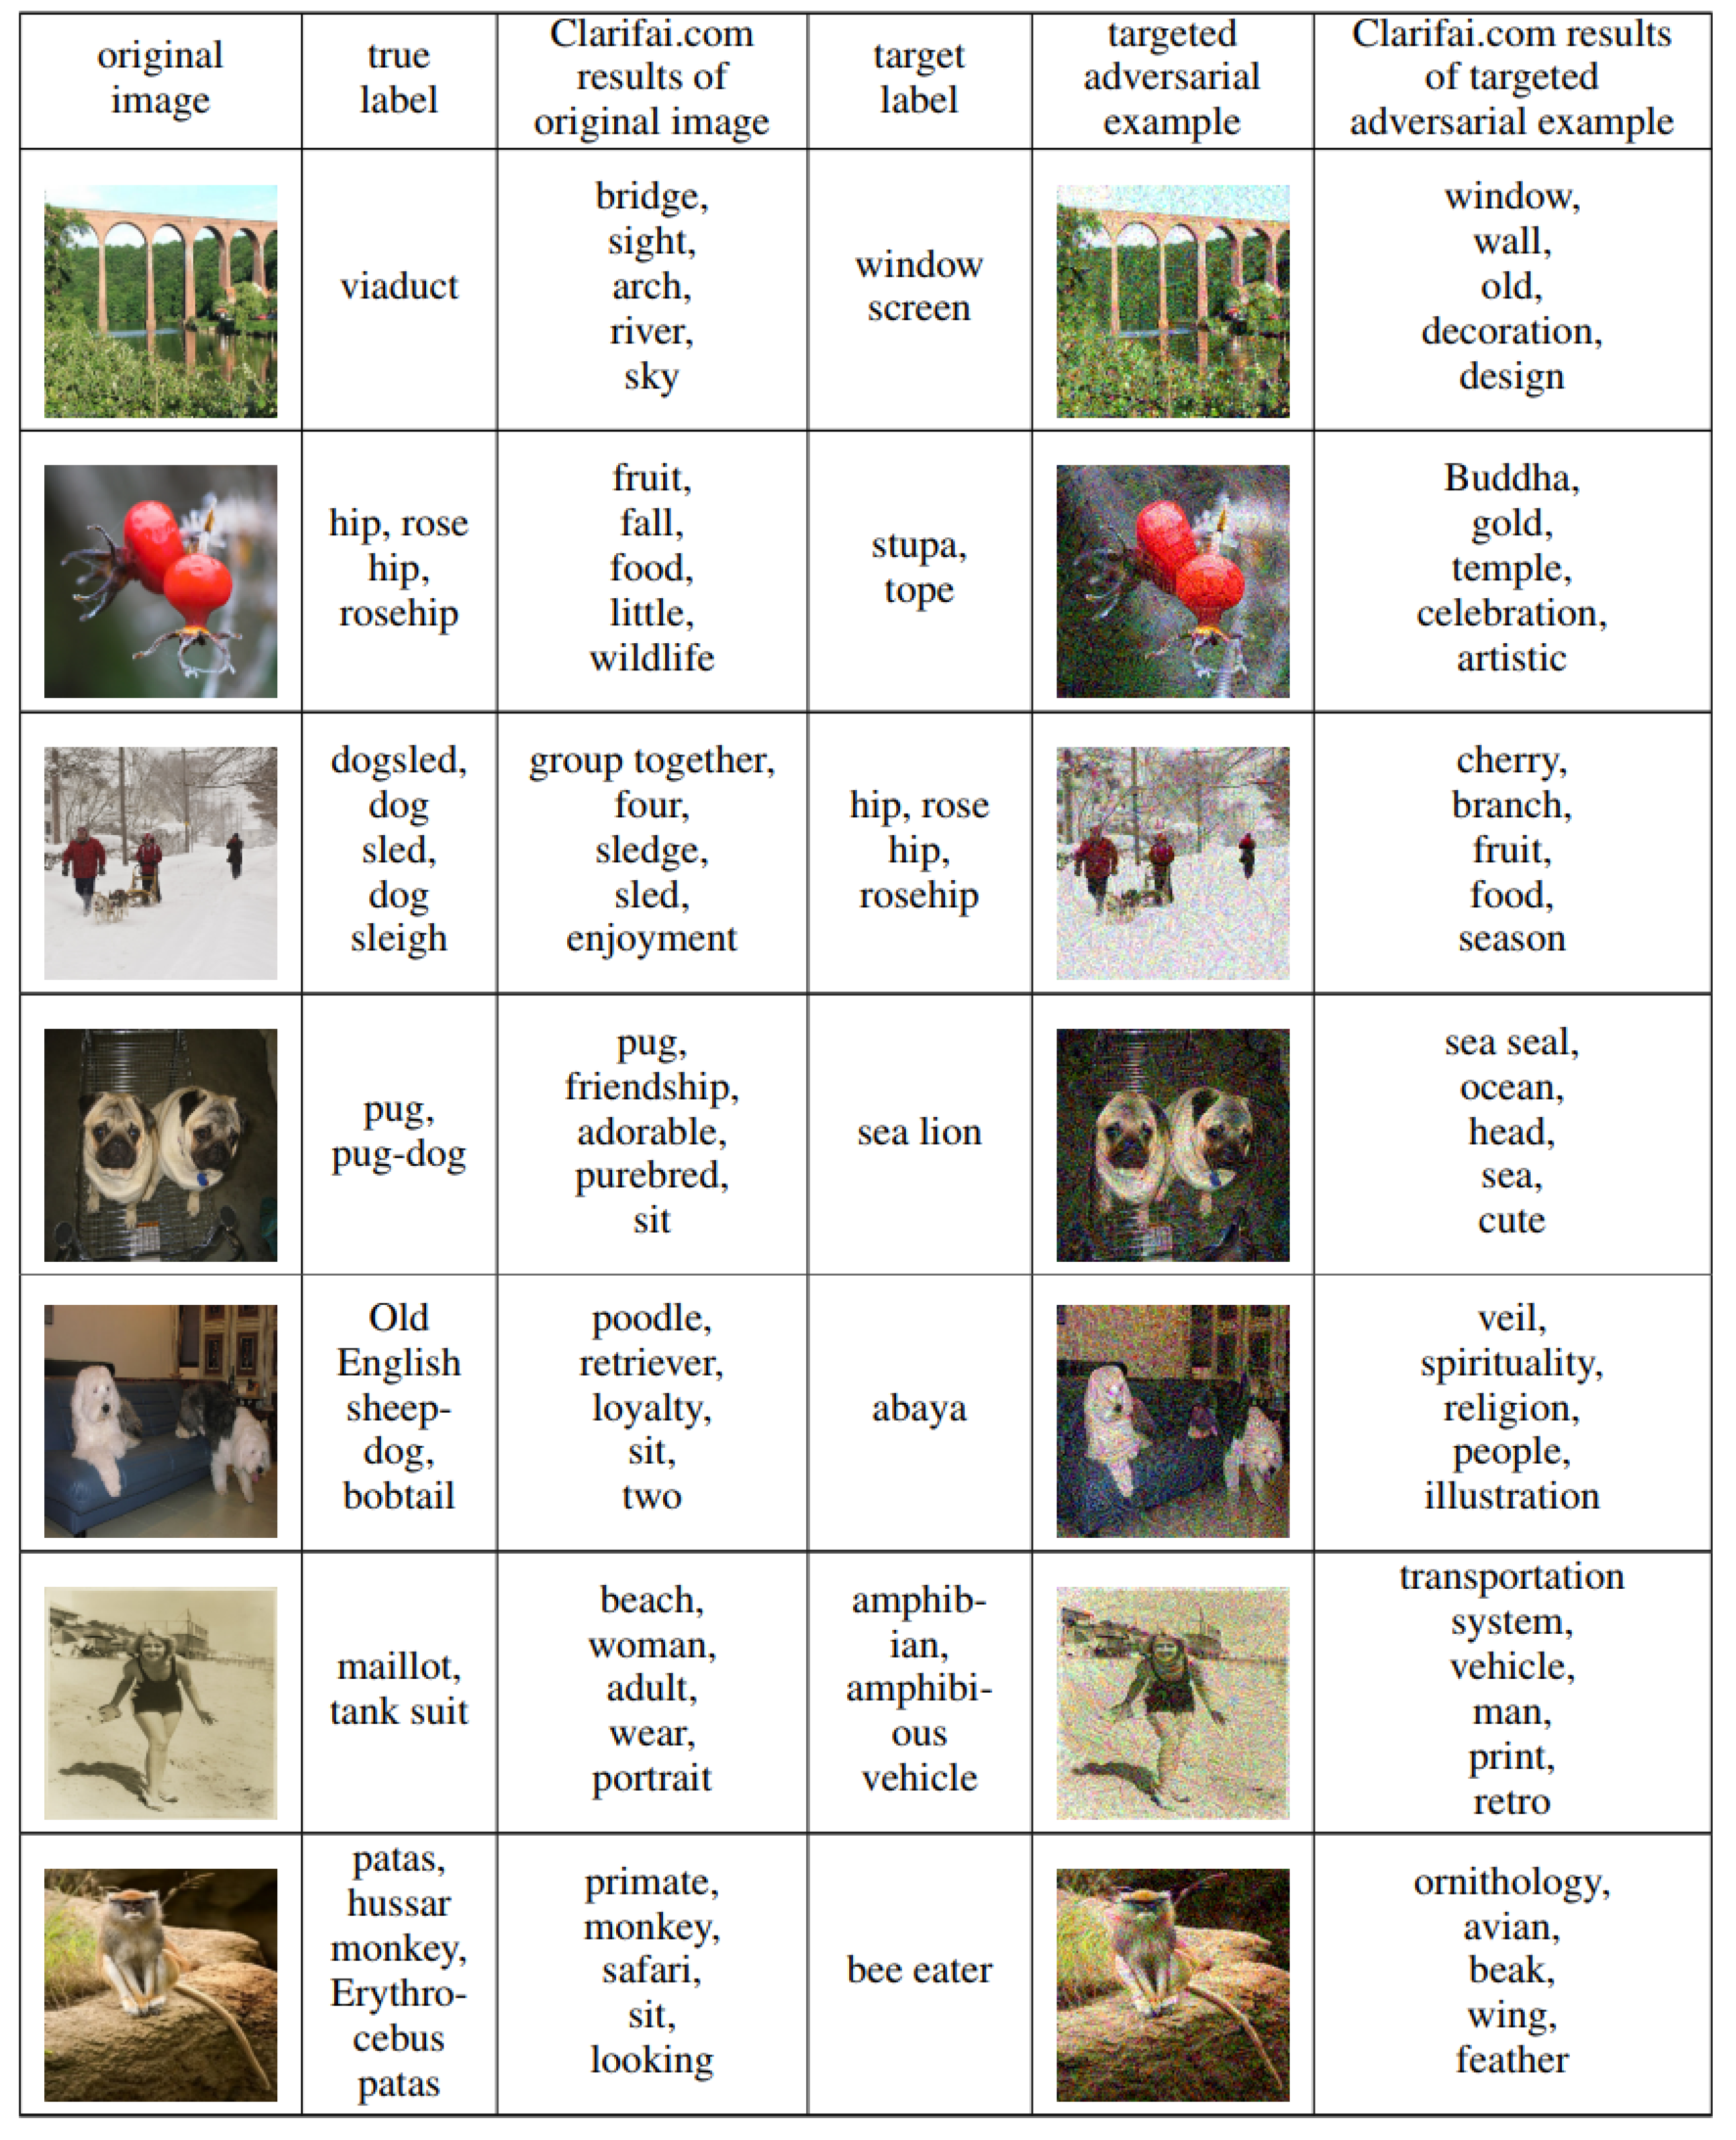 IMDB adversarial examples by attacking Word CNN. Blue and red texts